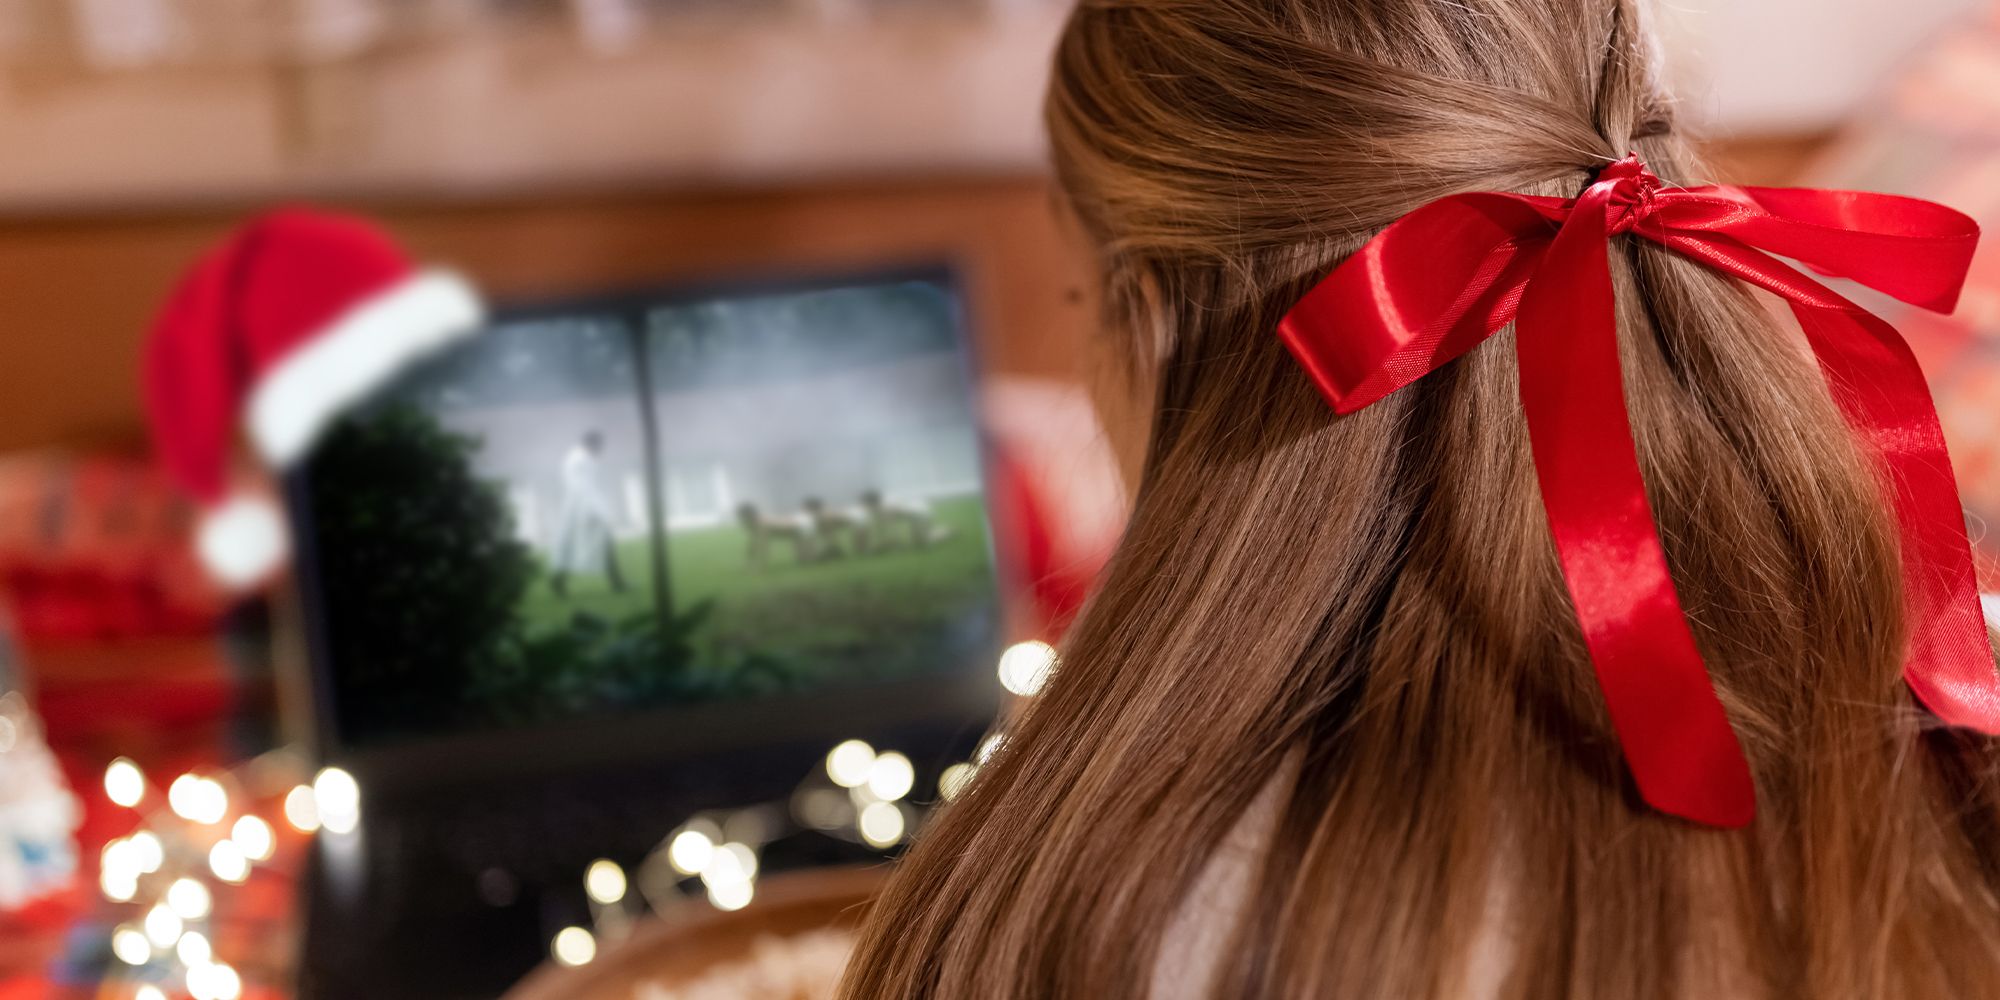 A girl with a red bow in her hair watching Human Centipede at Christmas